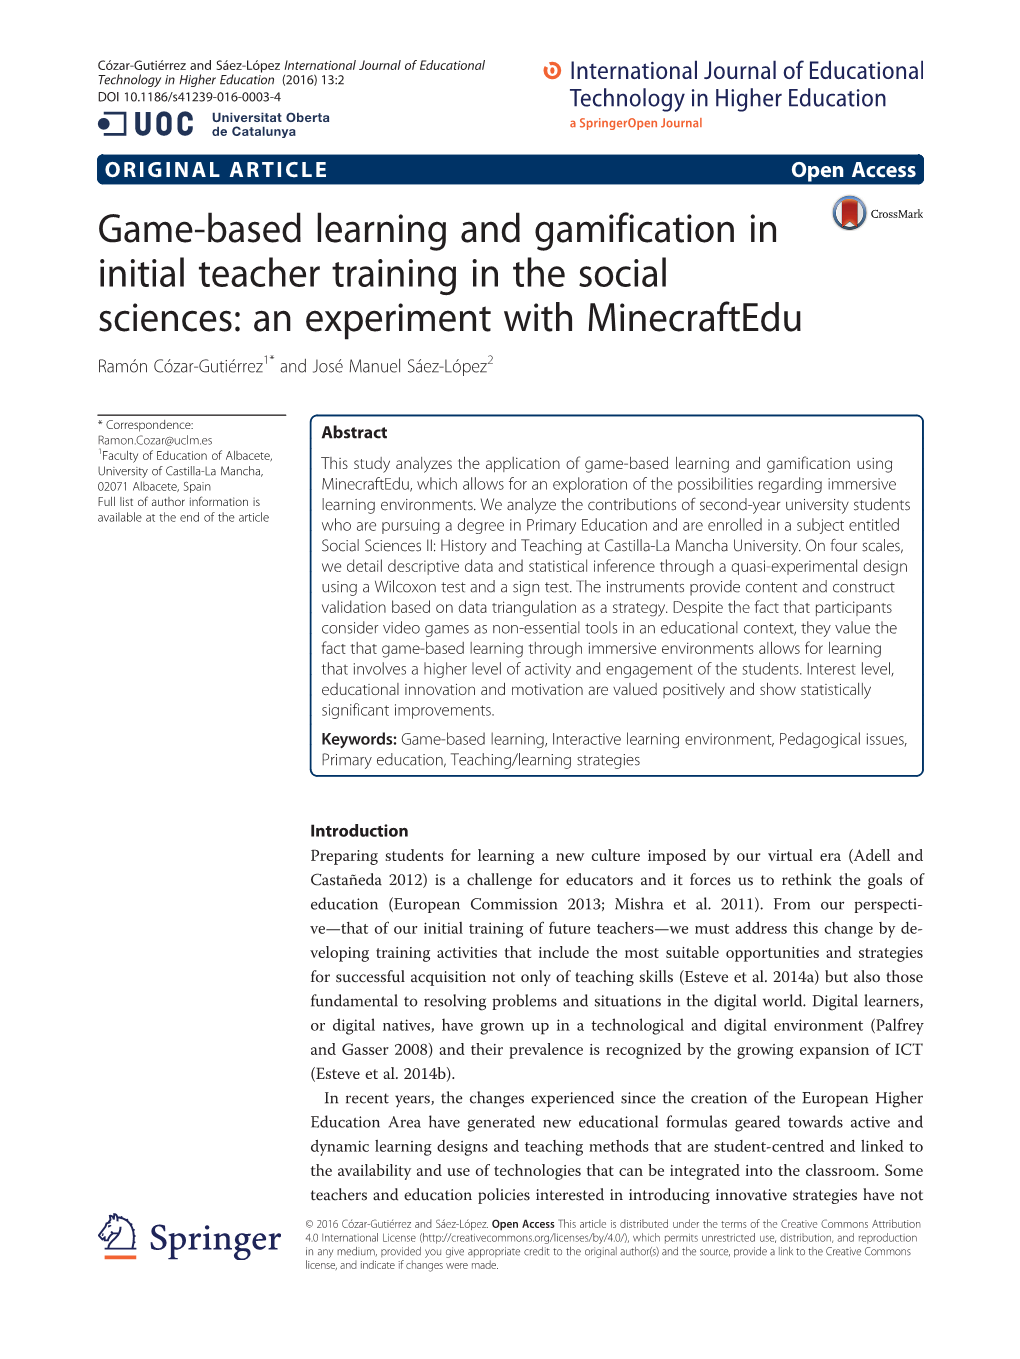 Game-Based Learning and Gamification in Initial